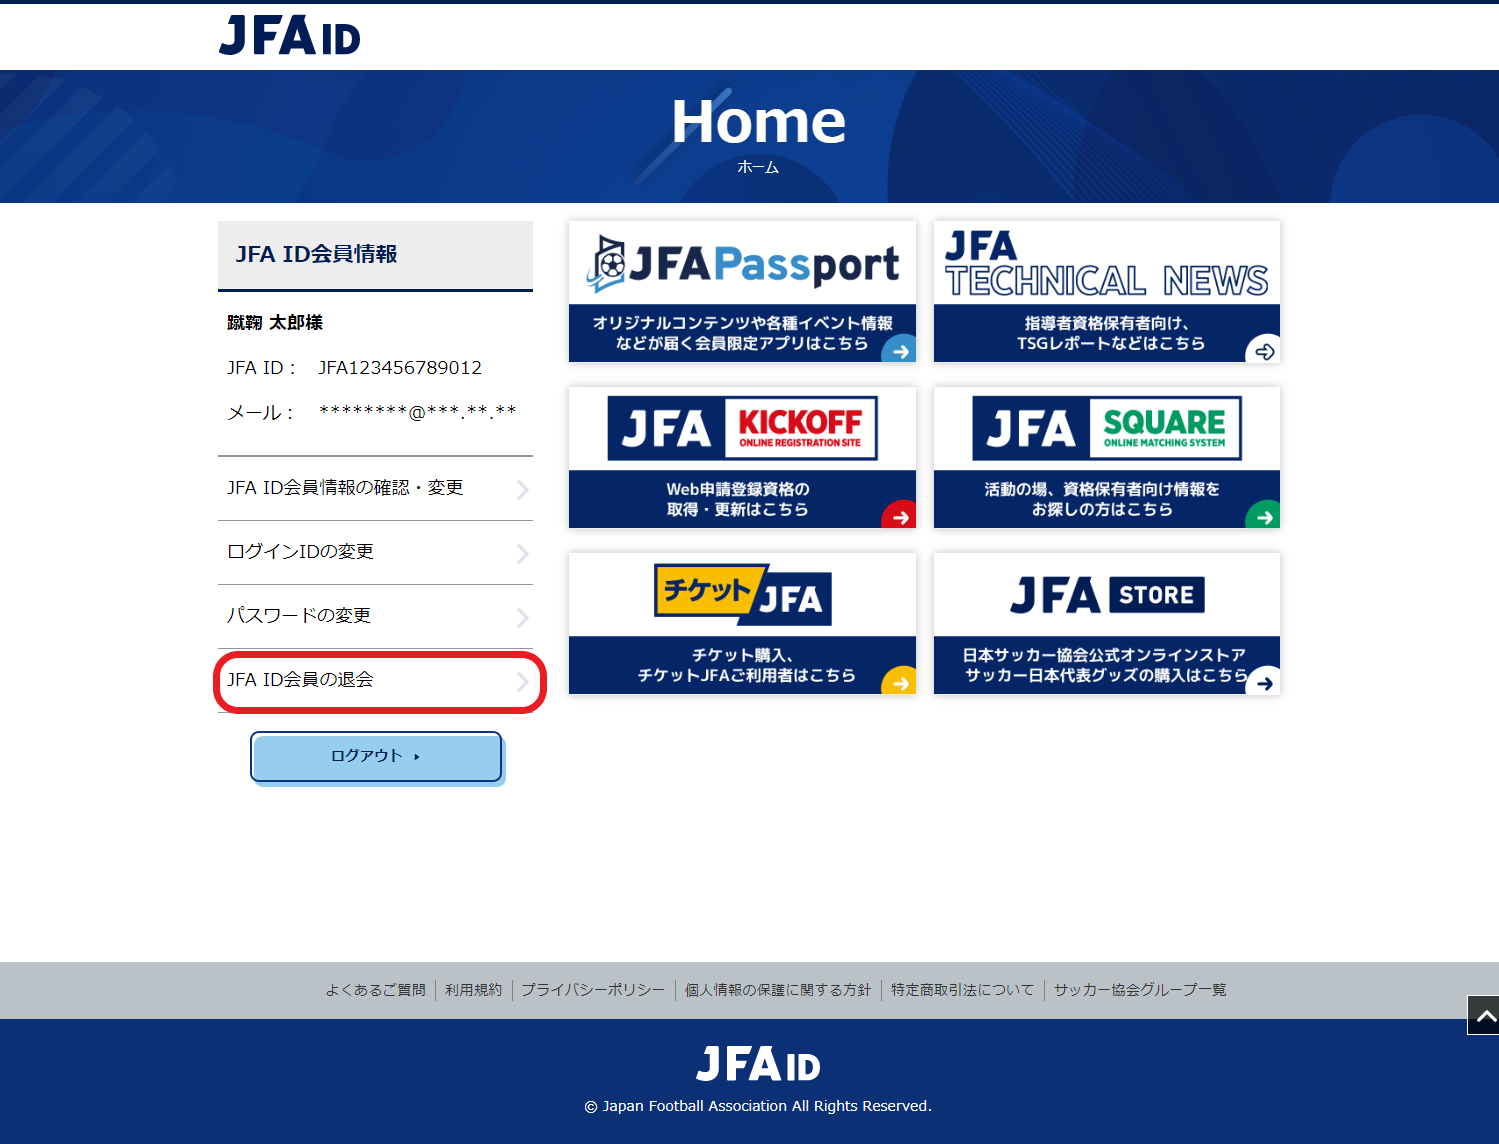 jfaid.jfa.jp_uniid-server_approve_privacy_policy.png